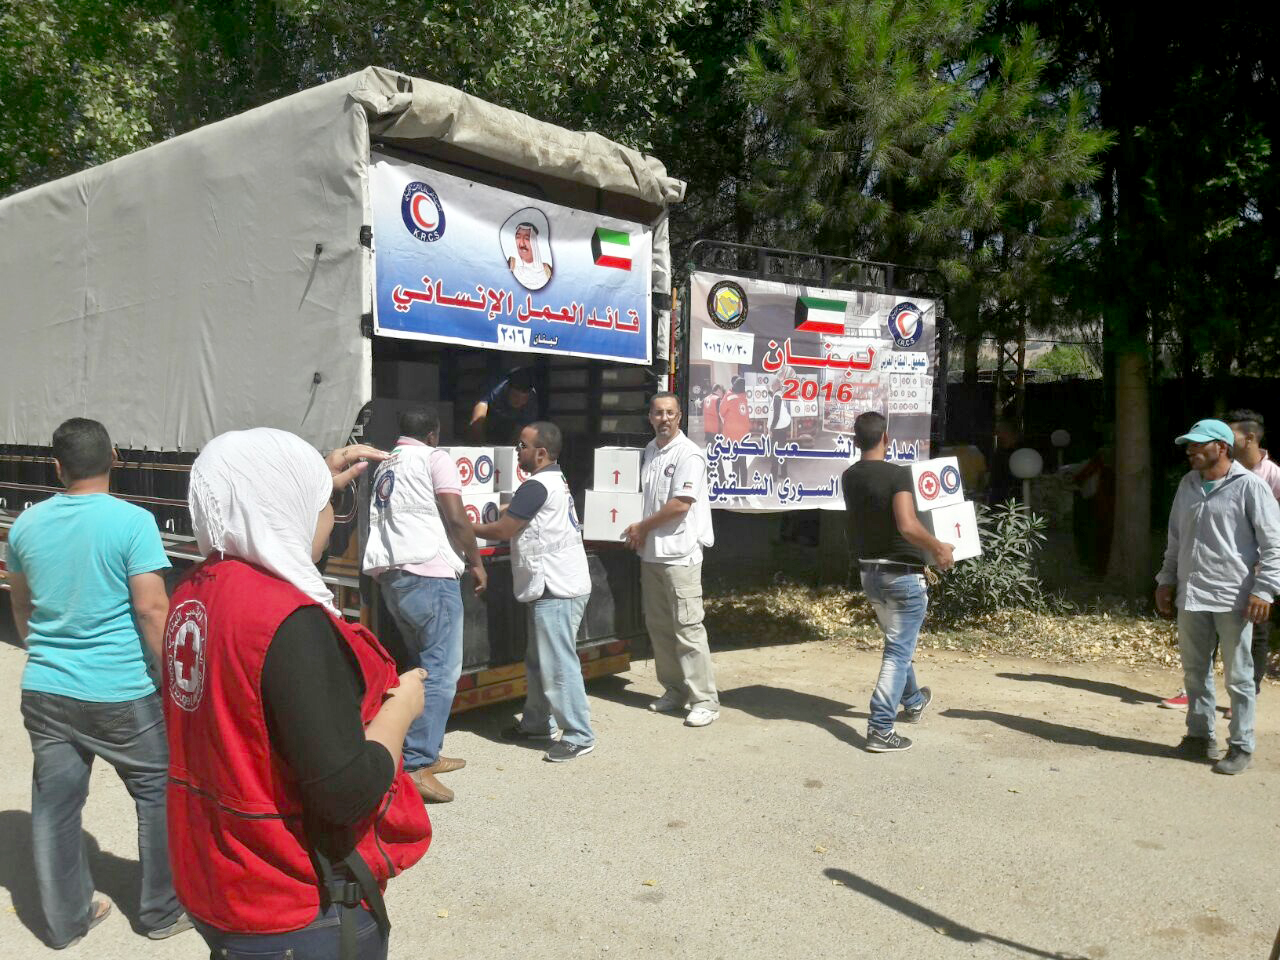 Kuwait Red Crescent delivers further aid to Syrians